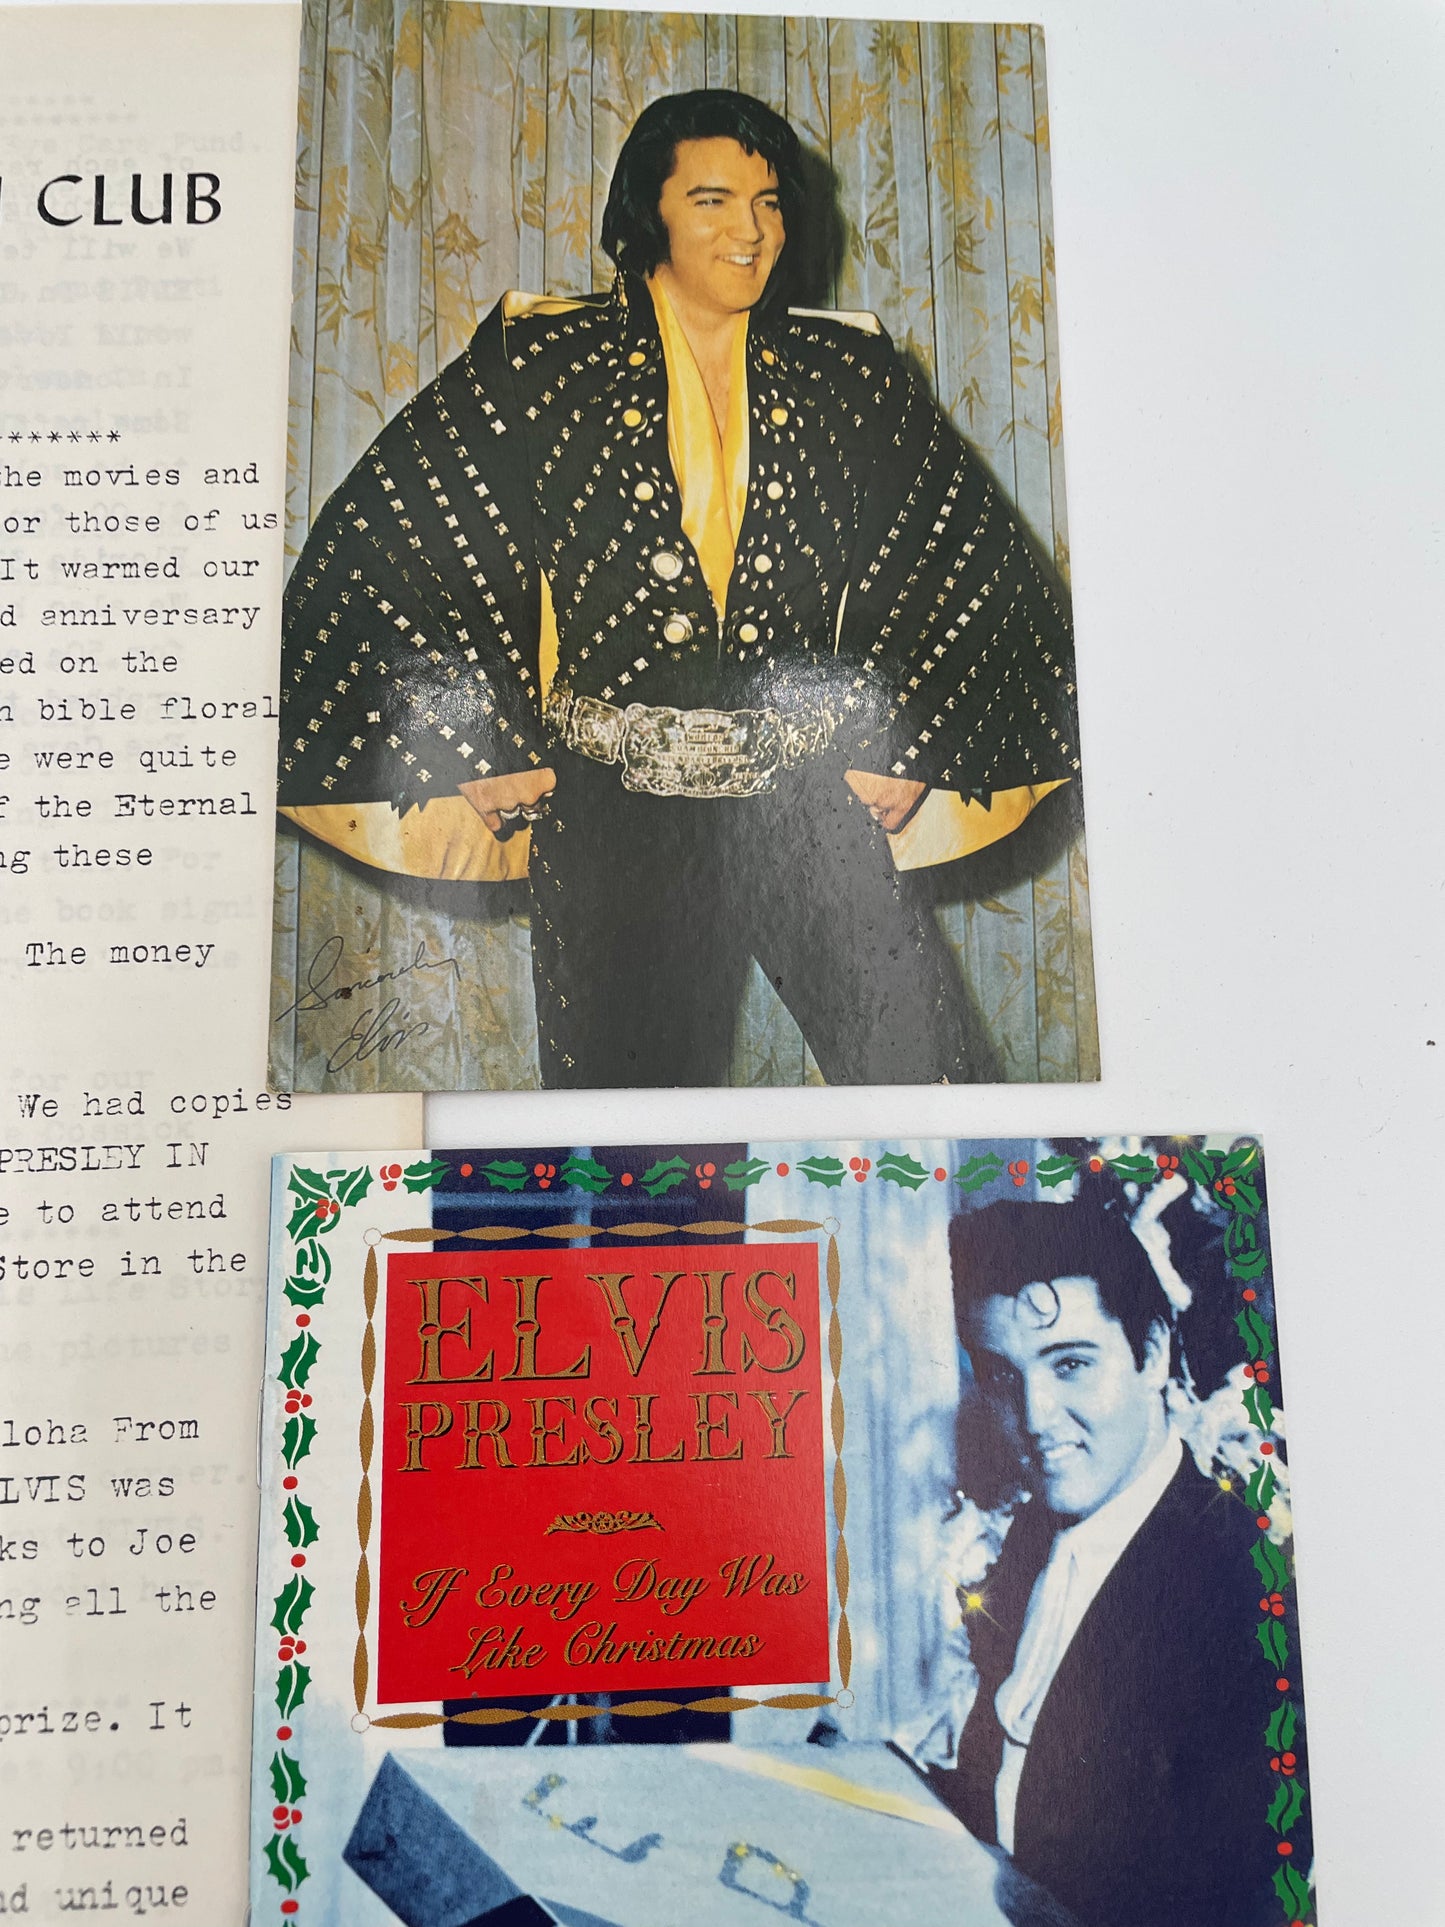 Elvis  - Fan Club Letter and Pics 1975 #102189